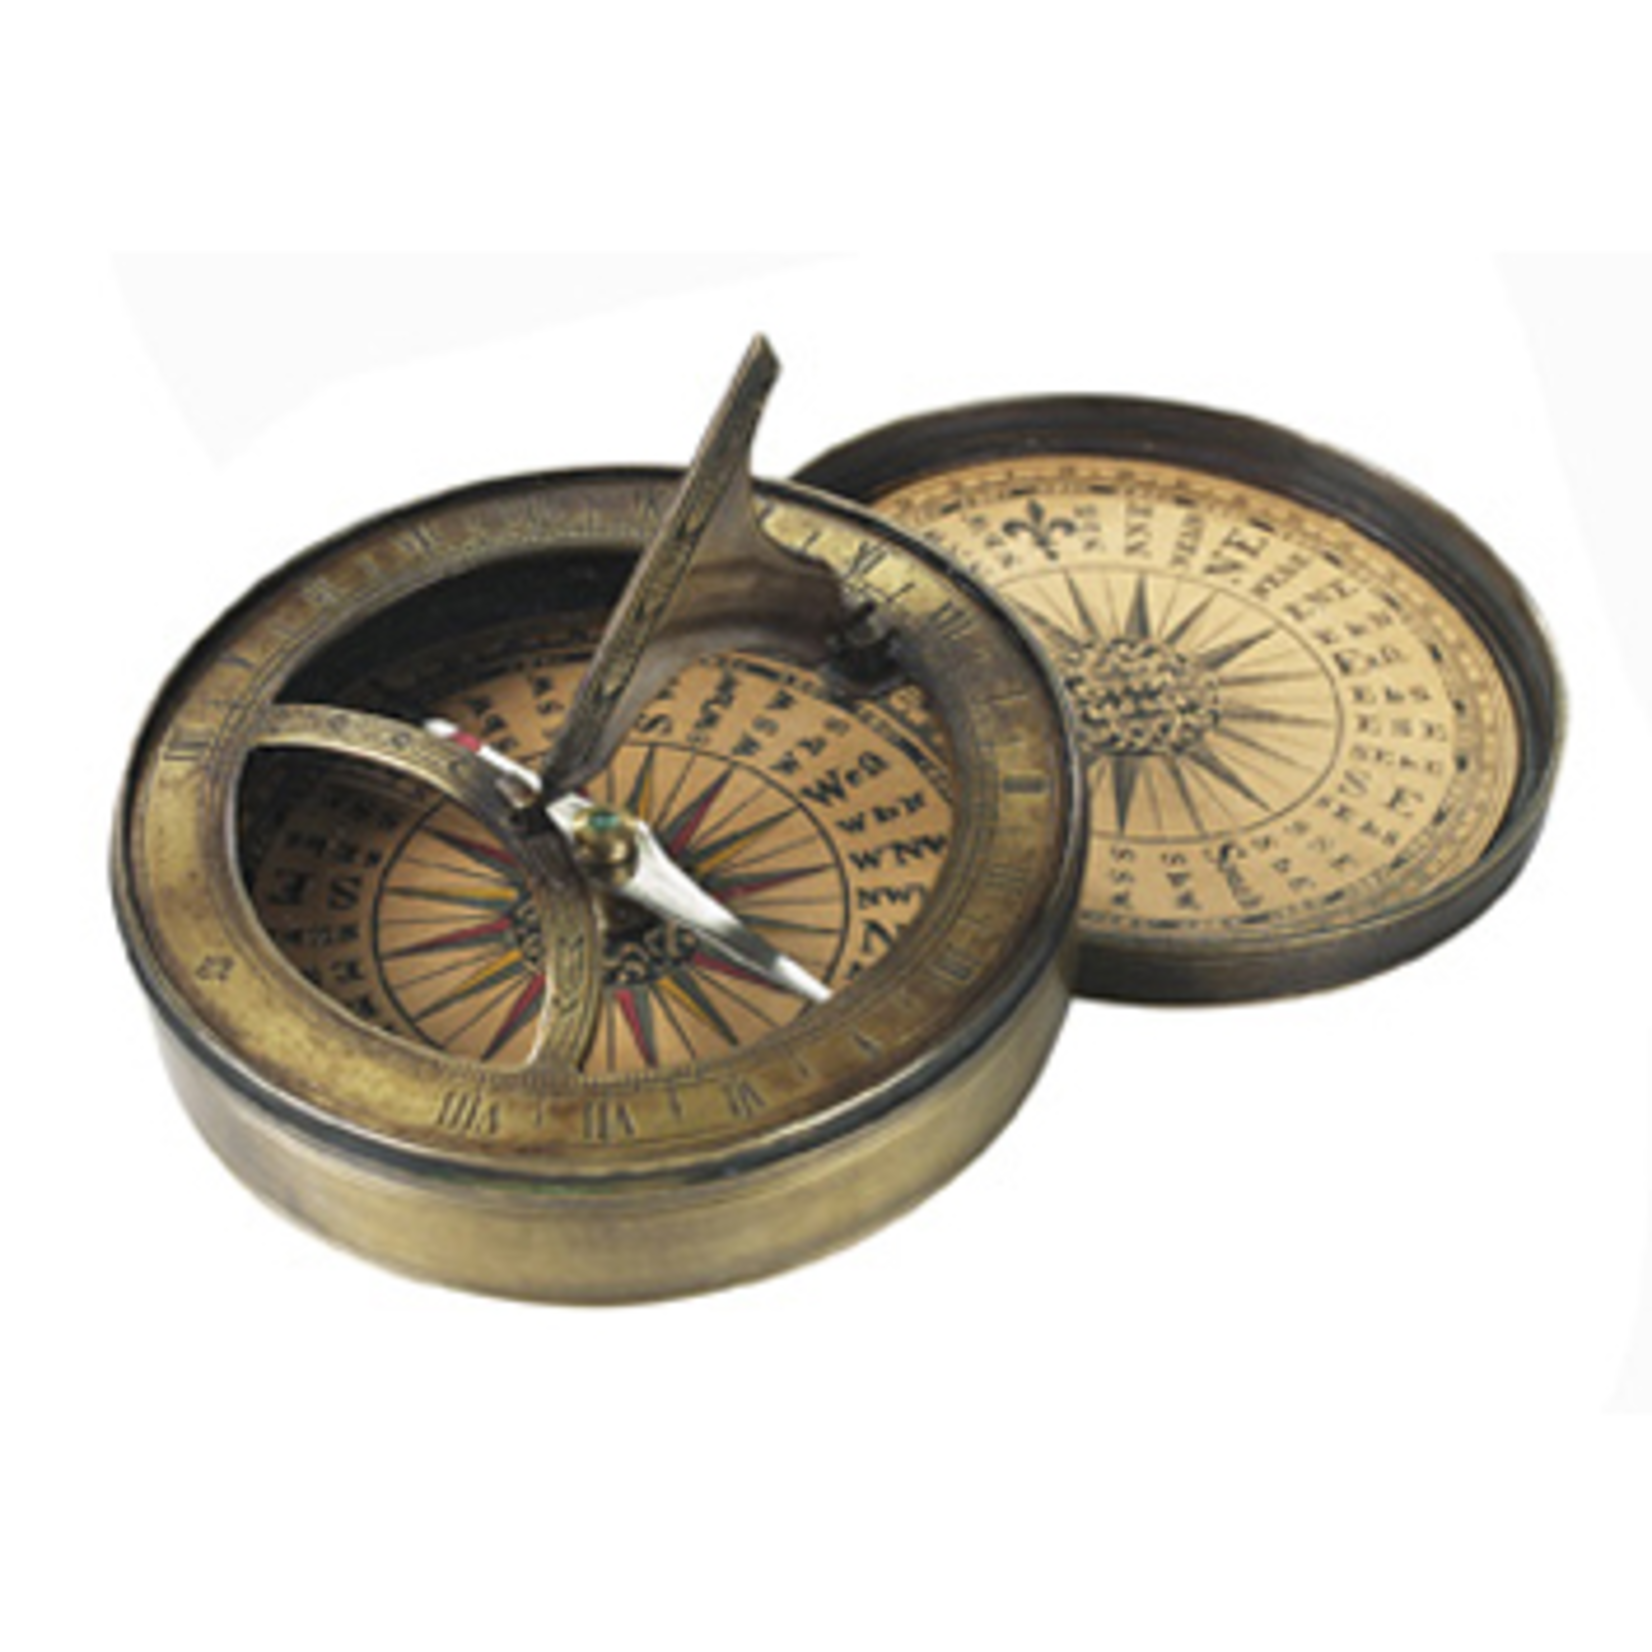 AUTHENTIC MODELS 18TH C SUDIAL COMPASS